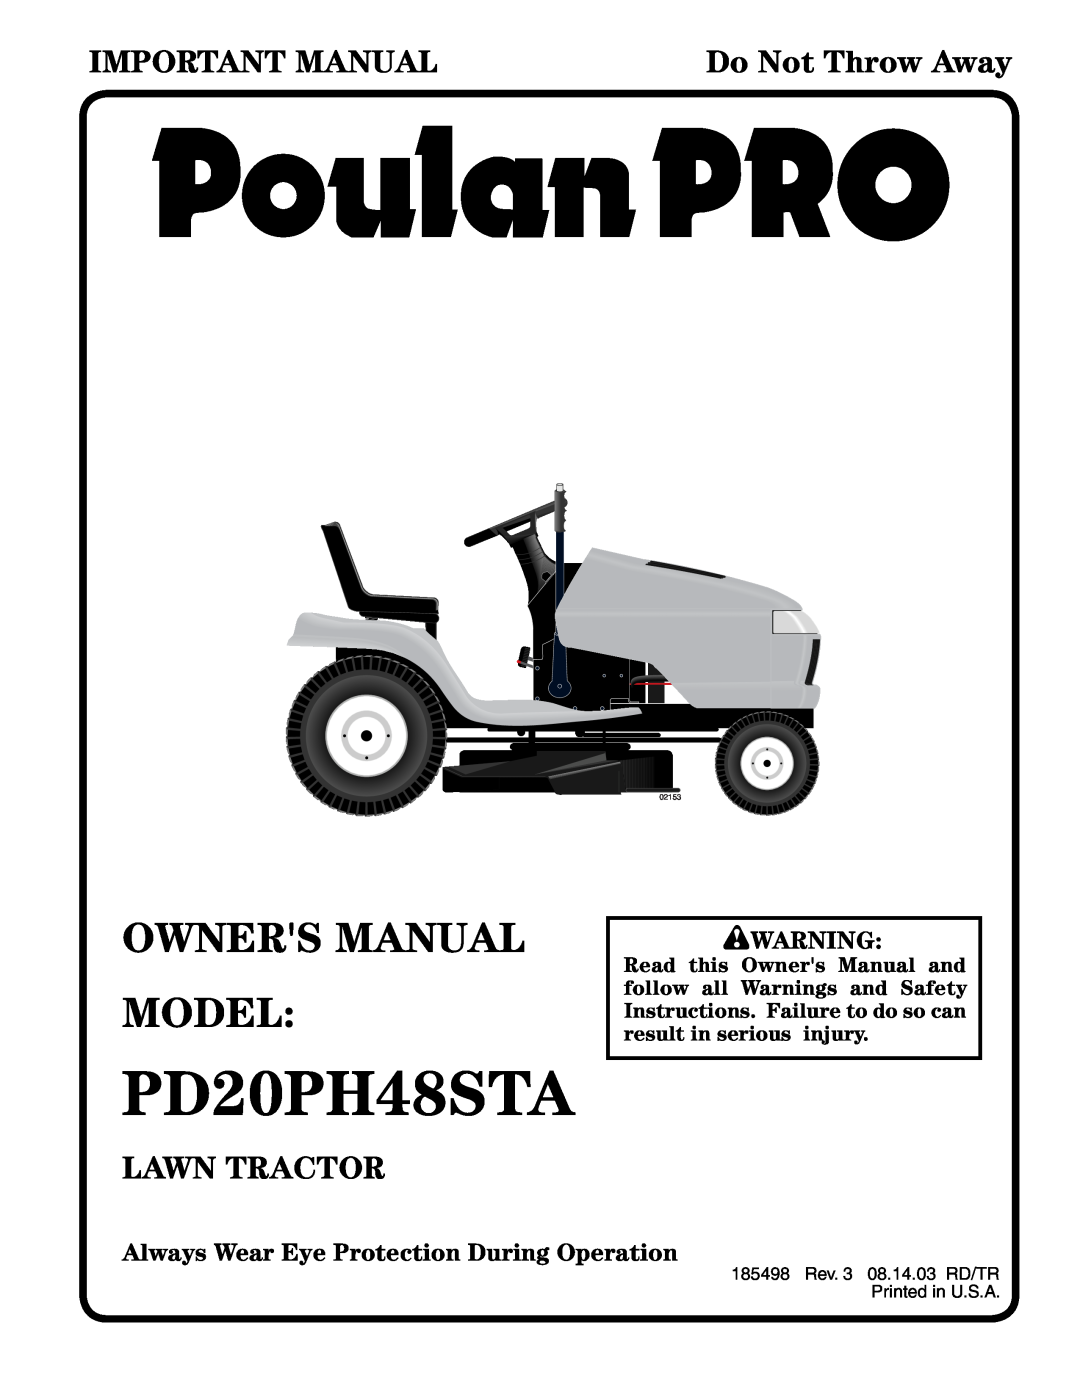 Poulan PD20PH48STA owner manual Always Wear Eye Protection During Operation, Important Manual, Lawn Tractor, 02153 